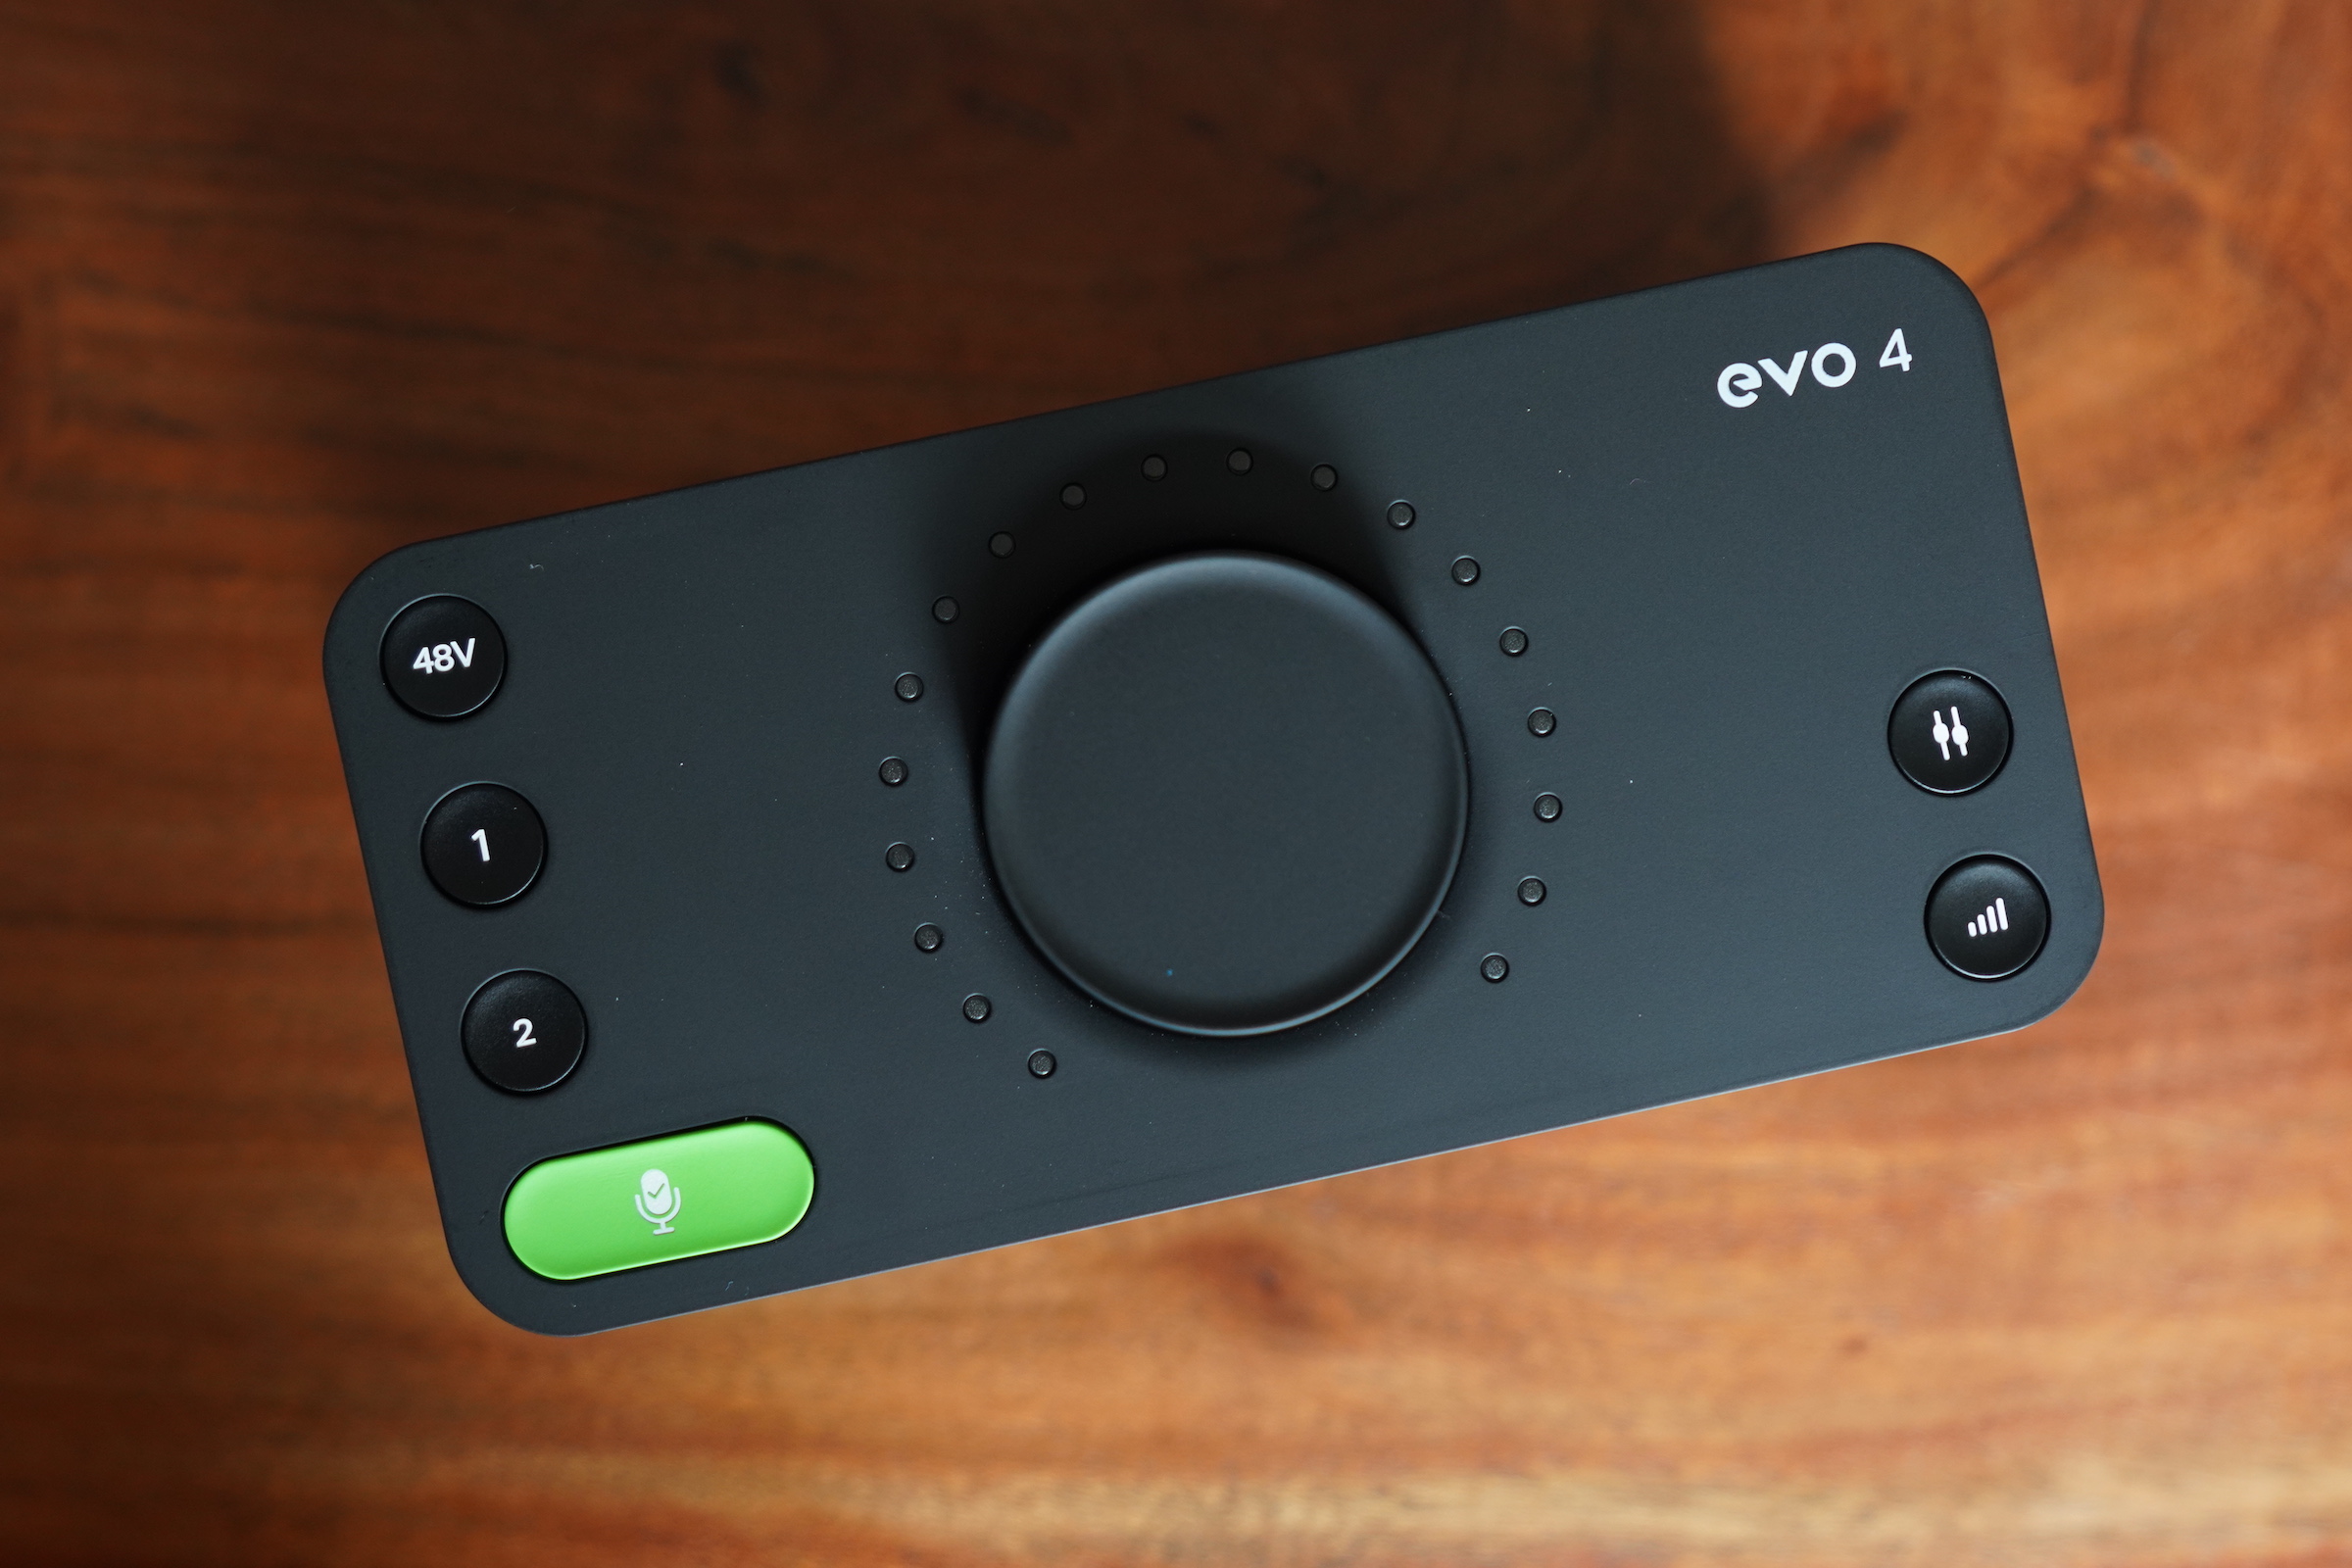 Audient's EVO 4 is a sleek, modern USB audio interface with useful 